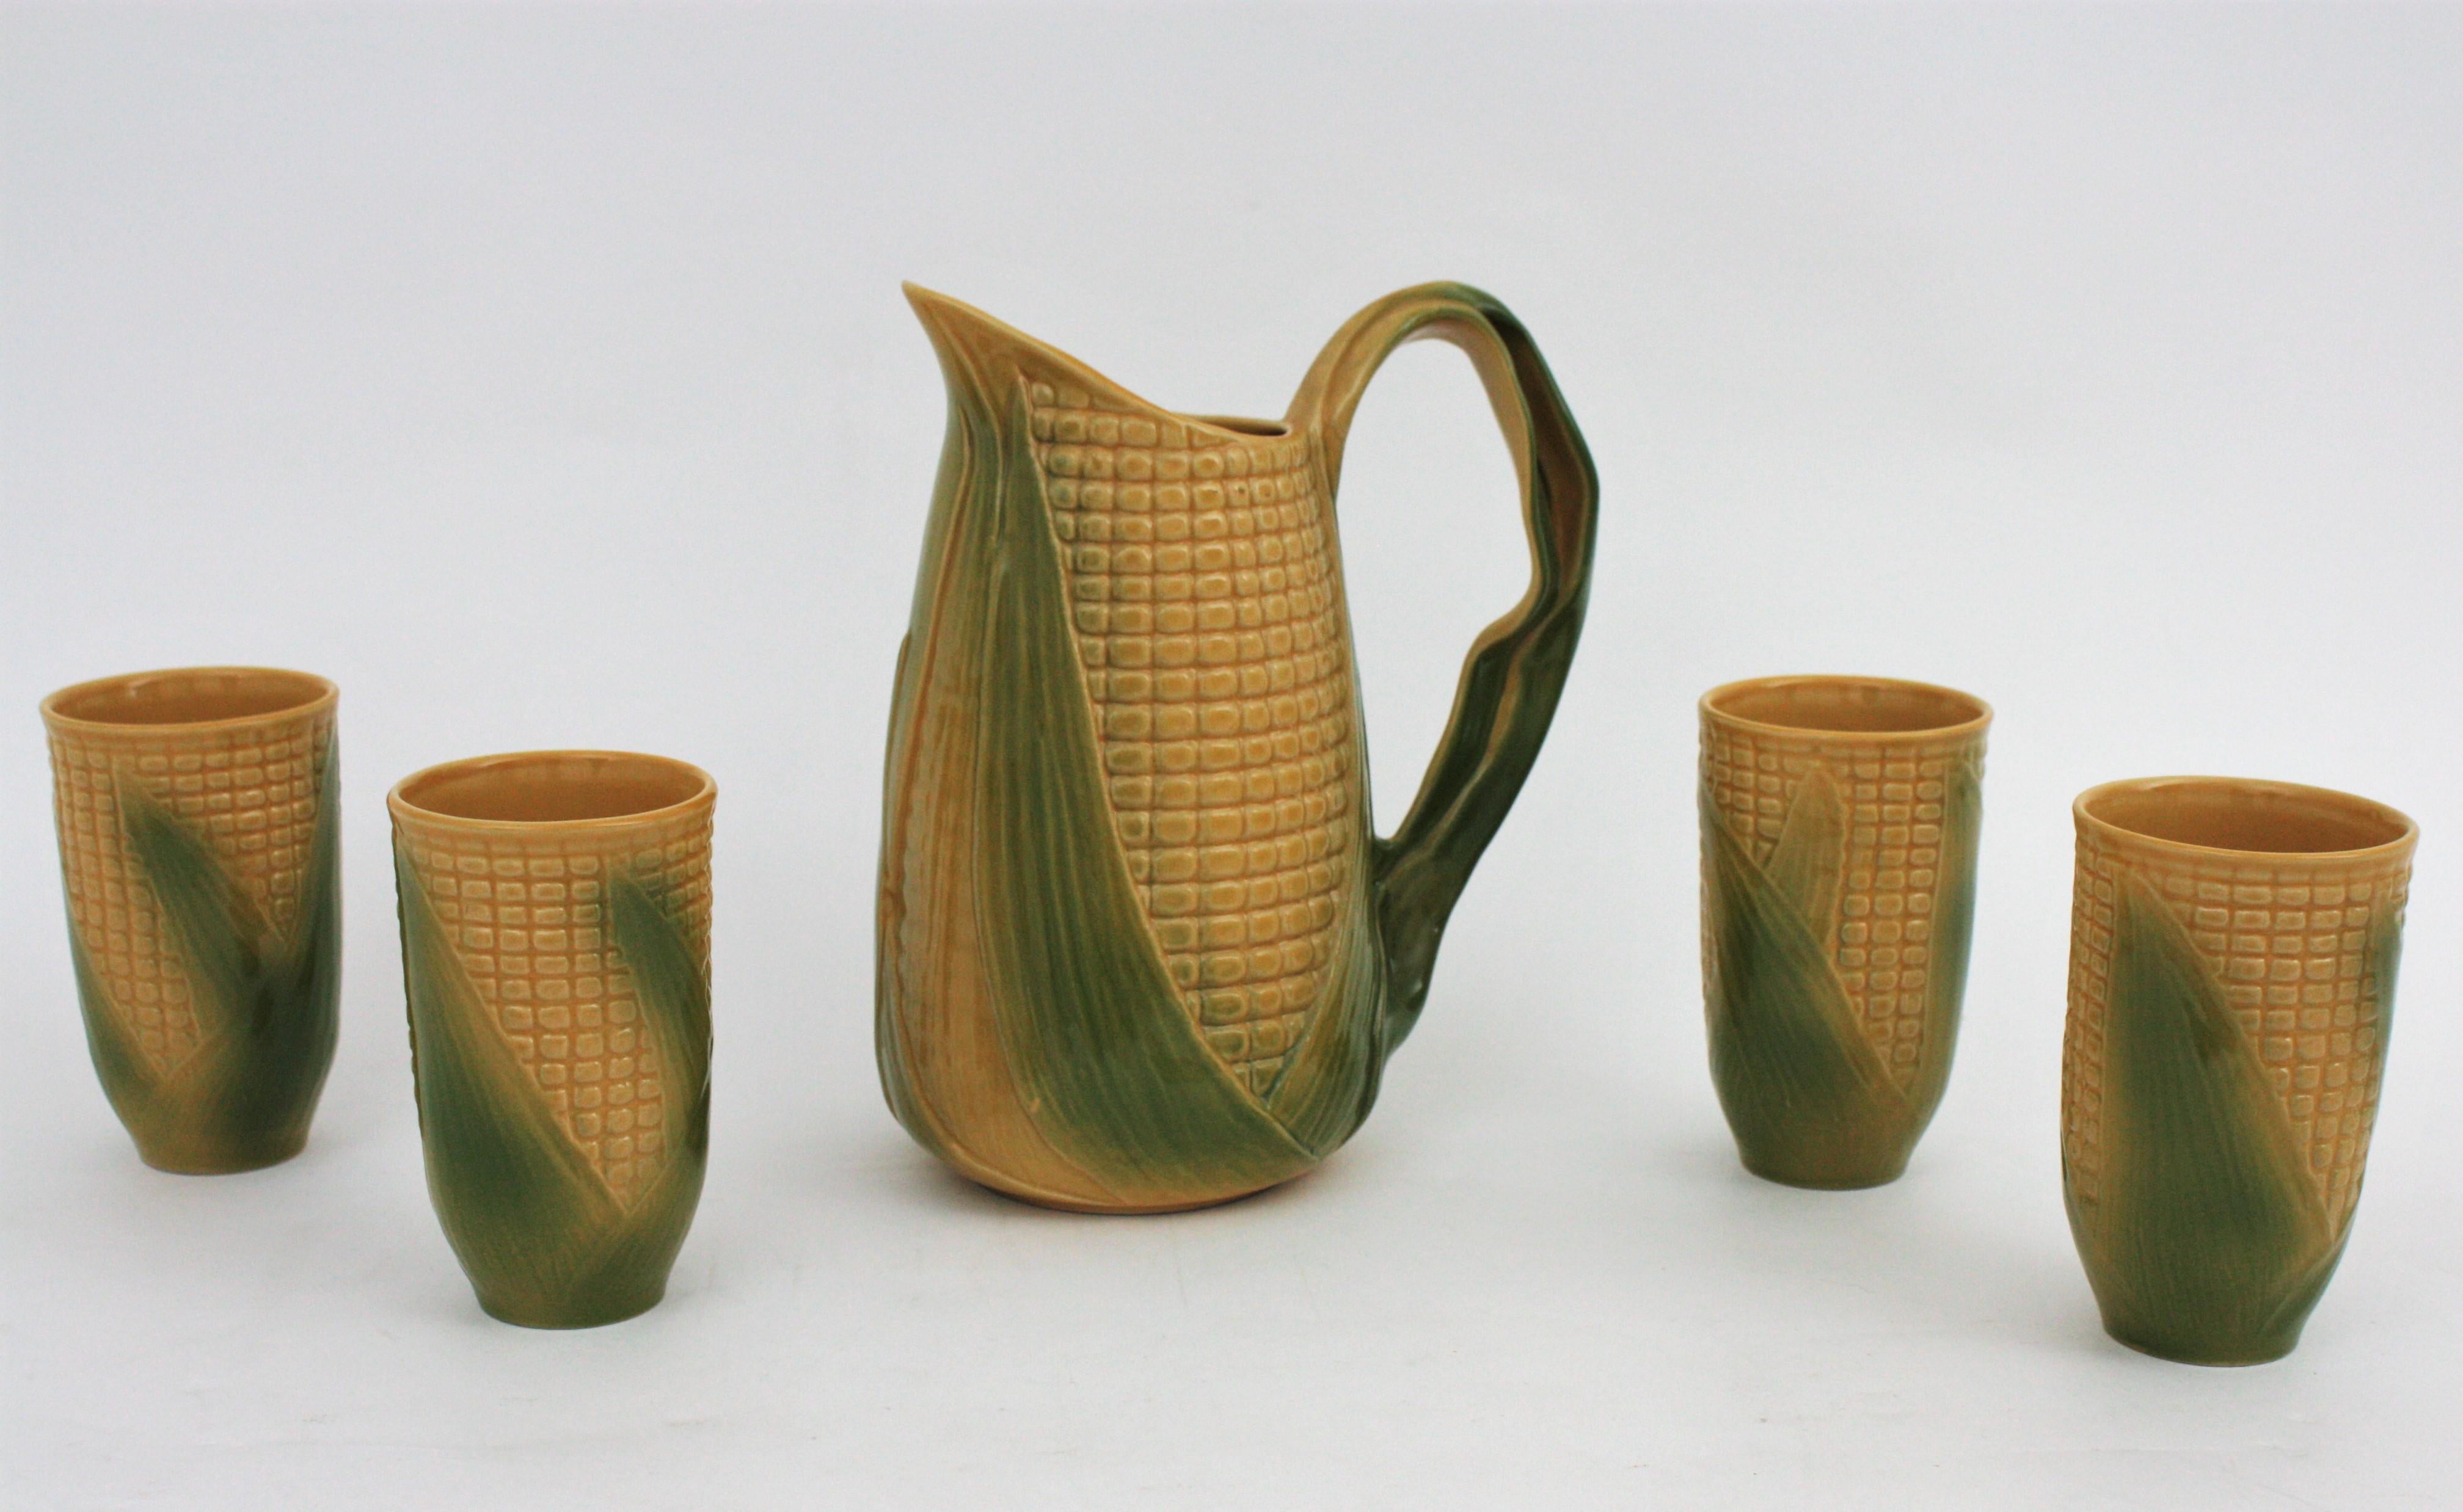 Eye-catching Majolica glazed ceramic corn on the cob jug and tumbler set of four. France, 1960s.
The set is comprised by a large ceramic jug with corn on the cob shape and four ceramic glasses with the same design.
This set will be a nice accent